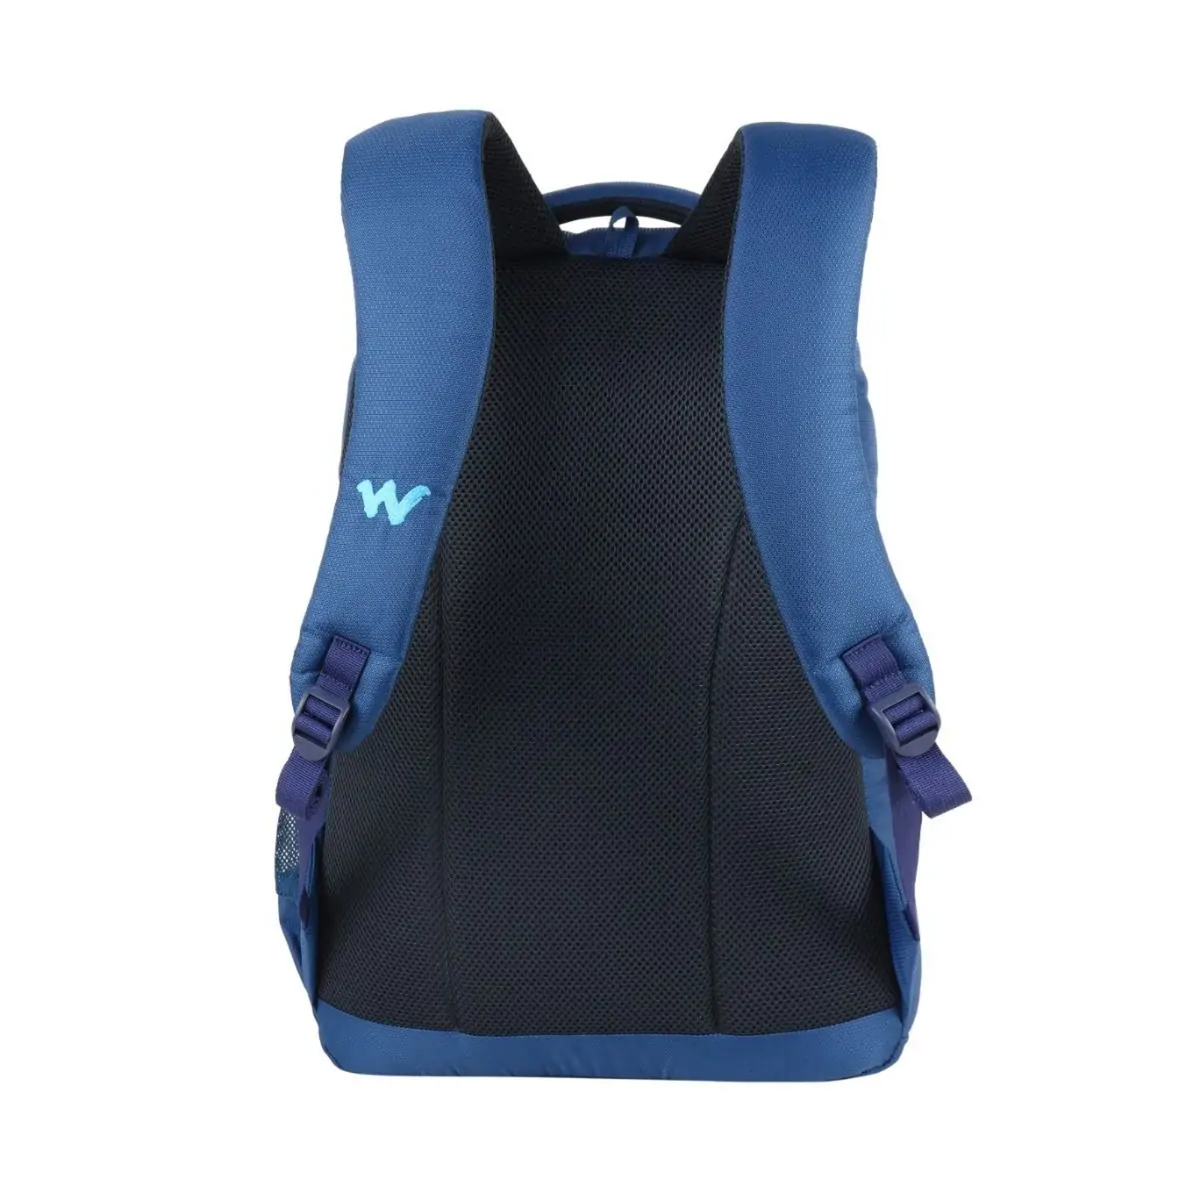 Wildcraft Ace2 Laptop Backpack, 18 Inches, Blue